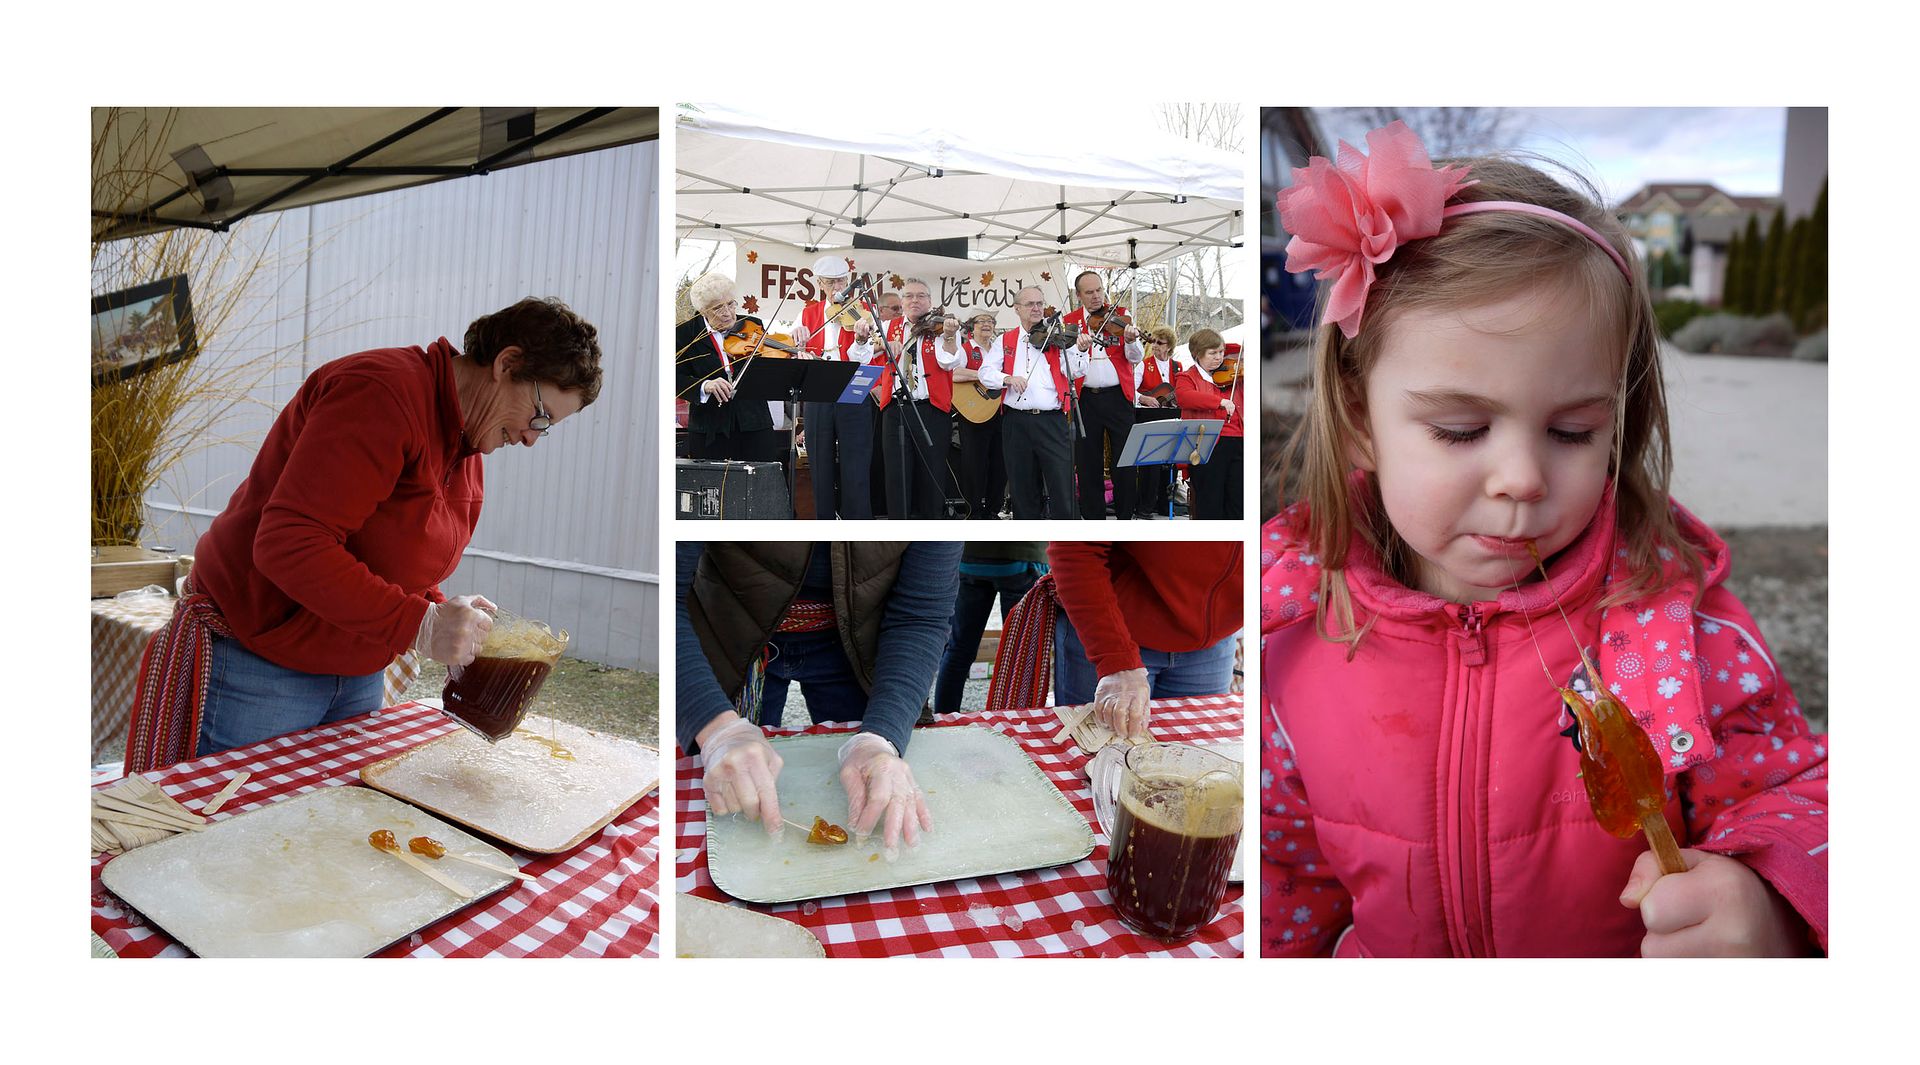 2012.03.27, Le Festival de l'Erable! (The maple festival) Break out the traditional fun and games, French Canadian music and thick maple syrup on a stick! Yummmmmm!